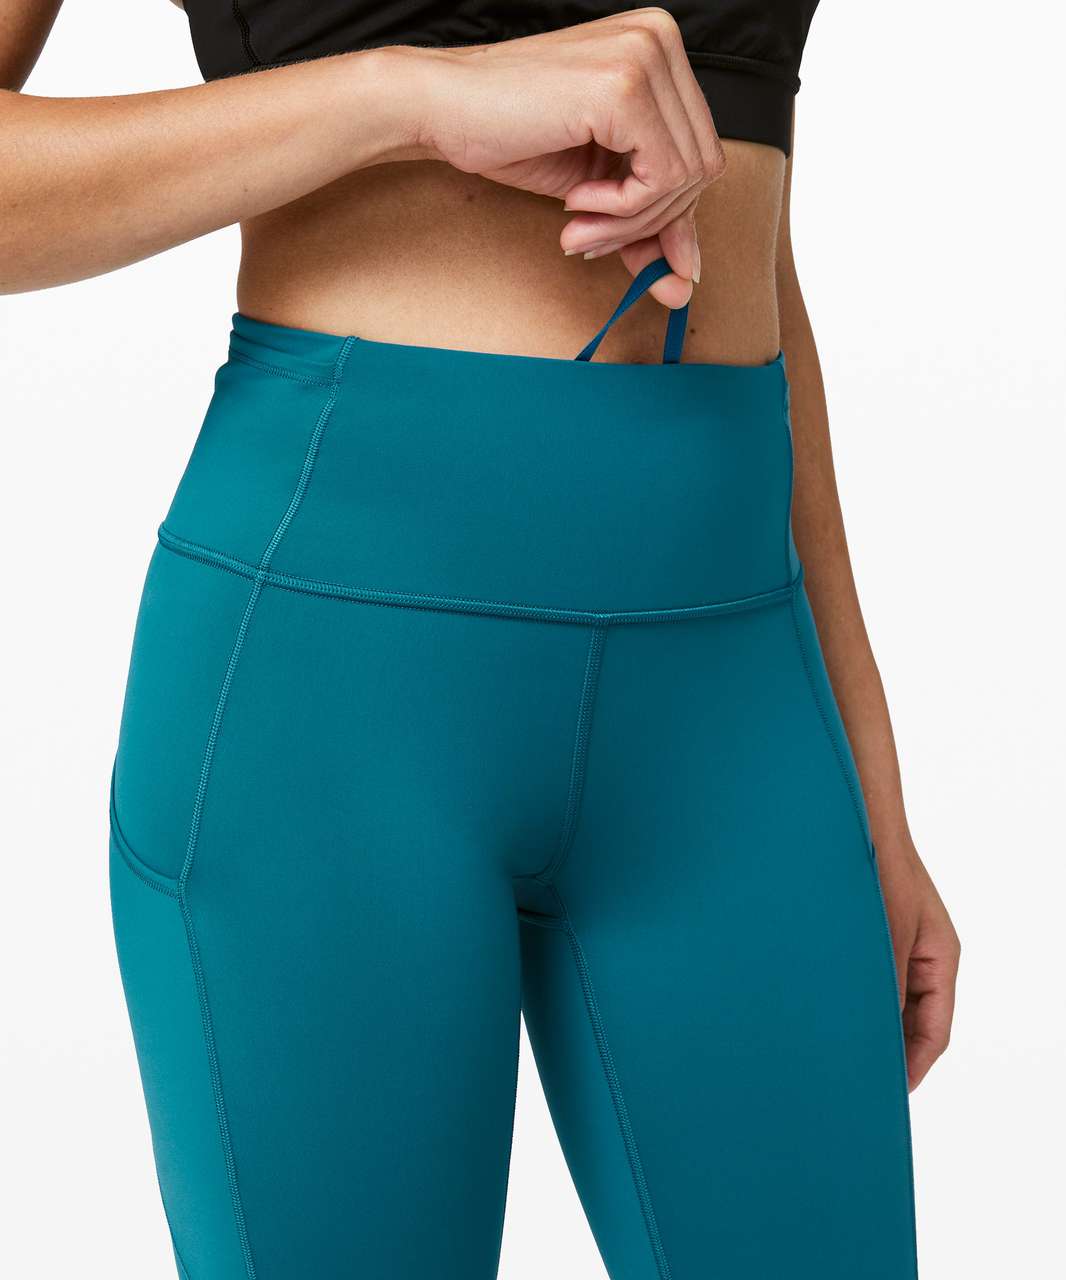 Lululemon Fast and Free Tight II 25" *Non-Reflective Nulux - Cyprus